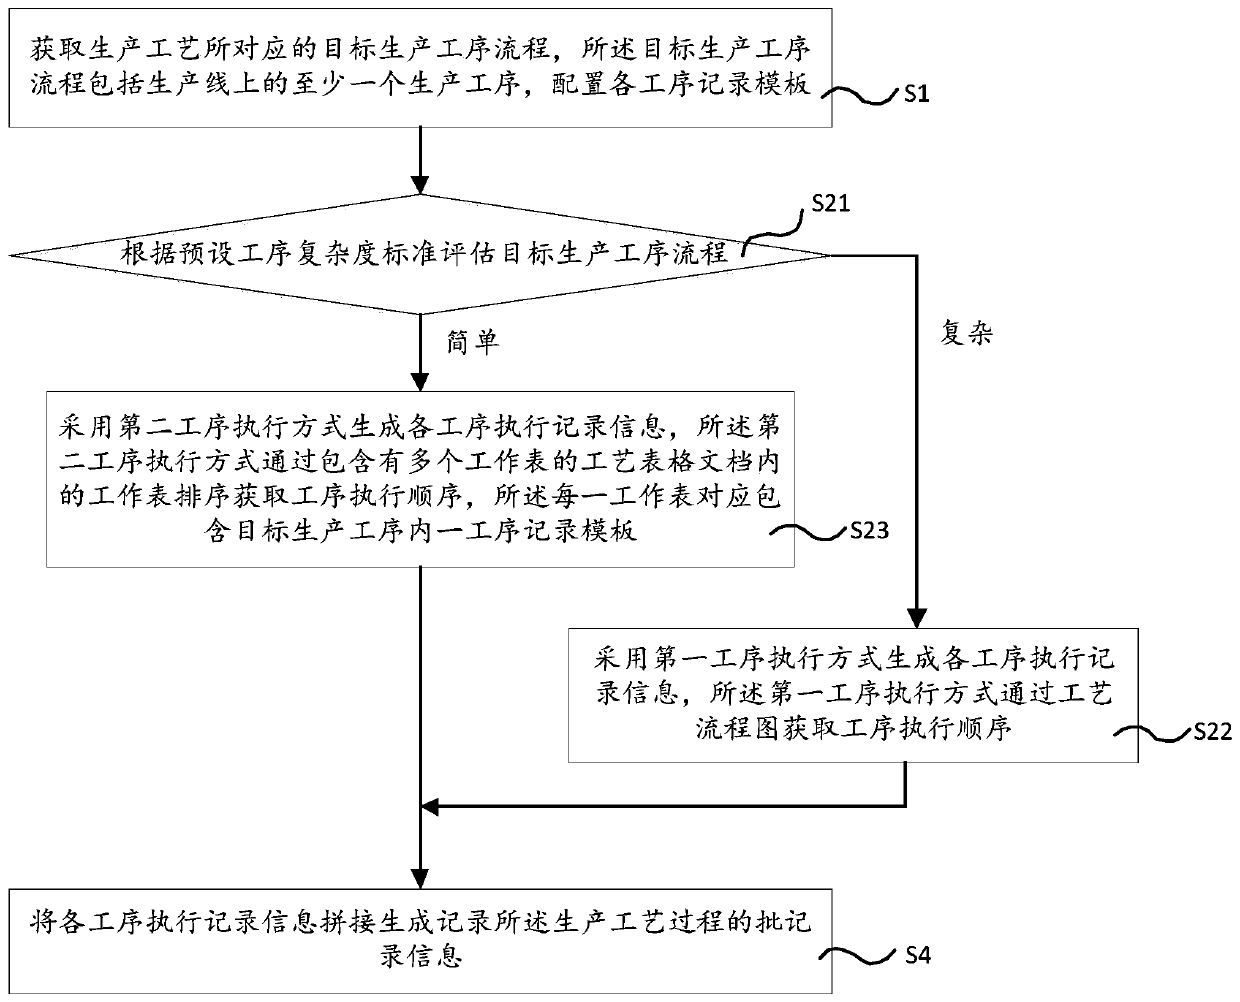 Production process recording method and device based on flow chart and table